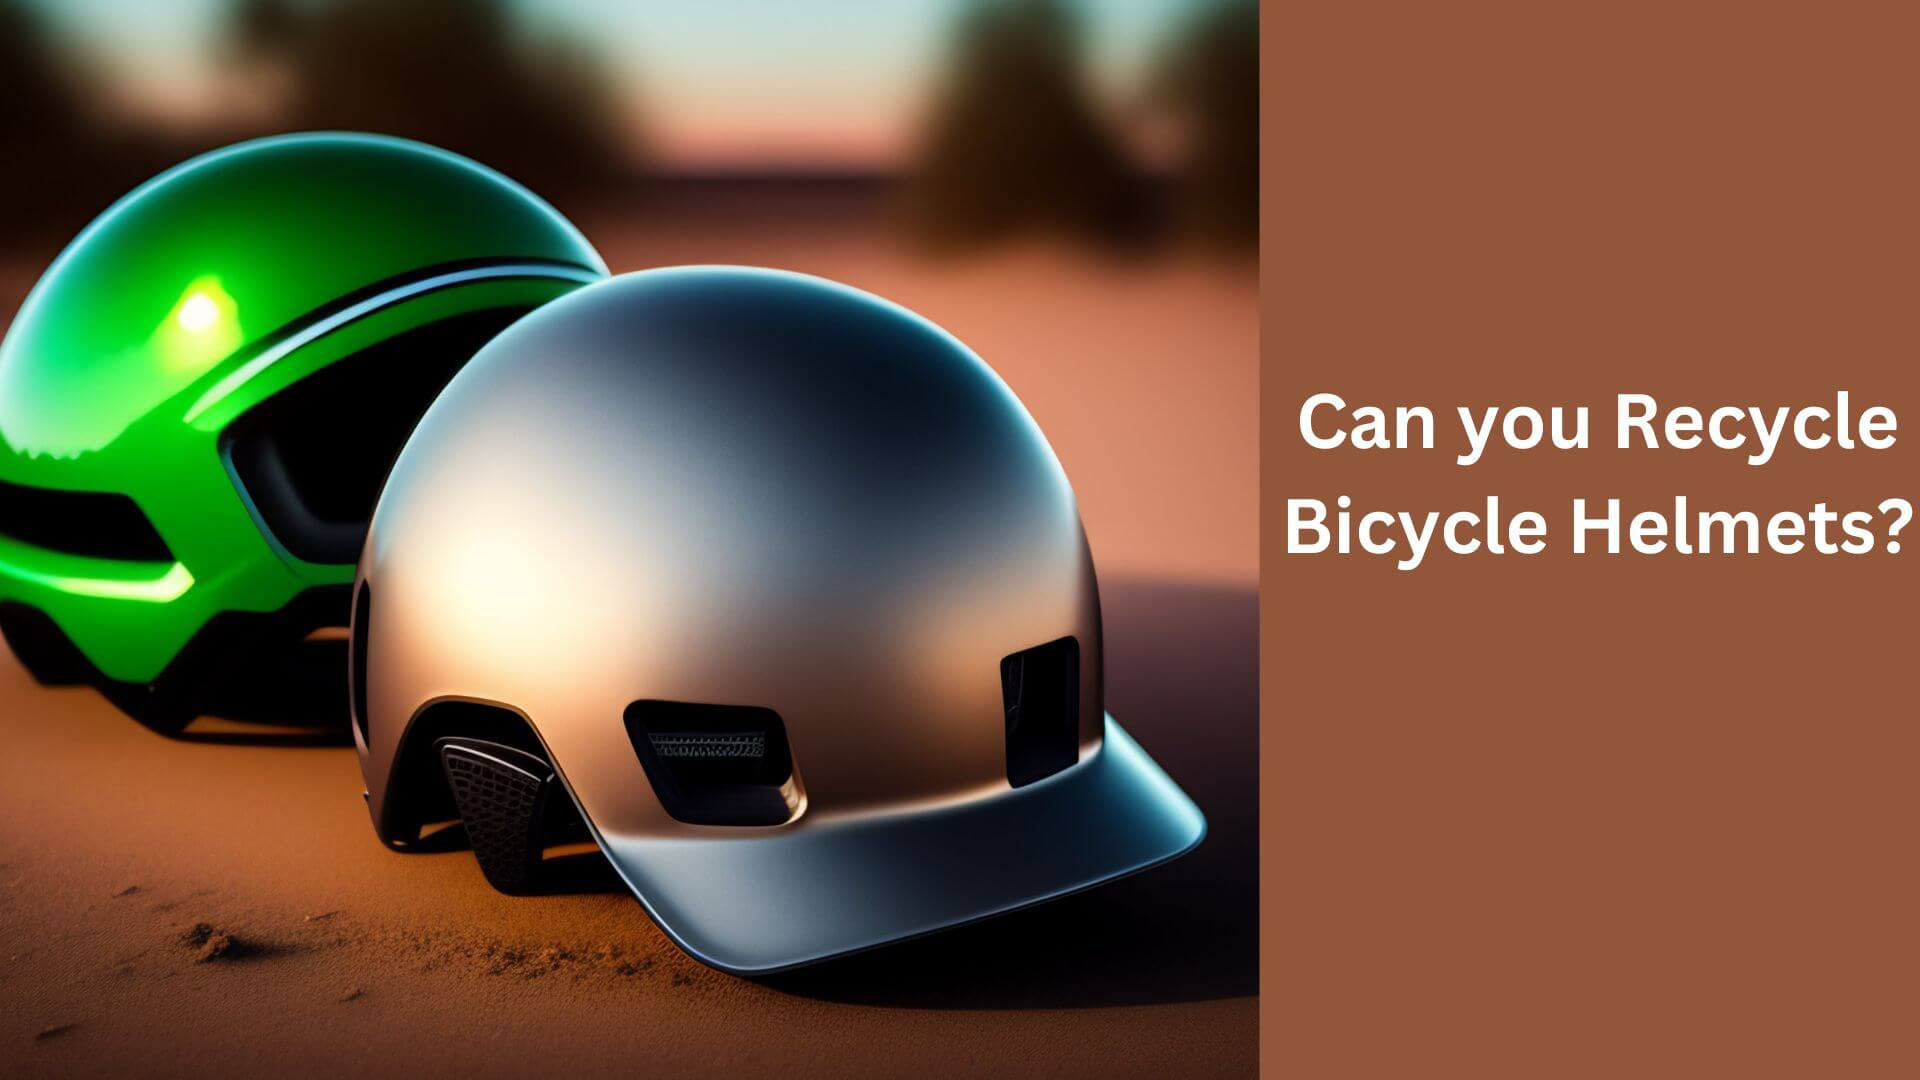 Can you Recycle Bicycle Helmets?